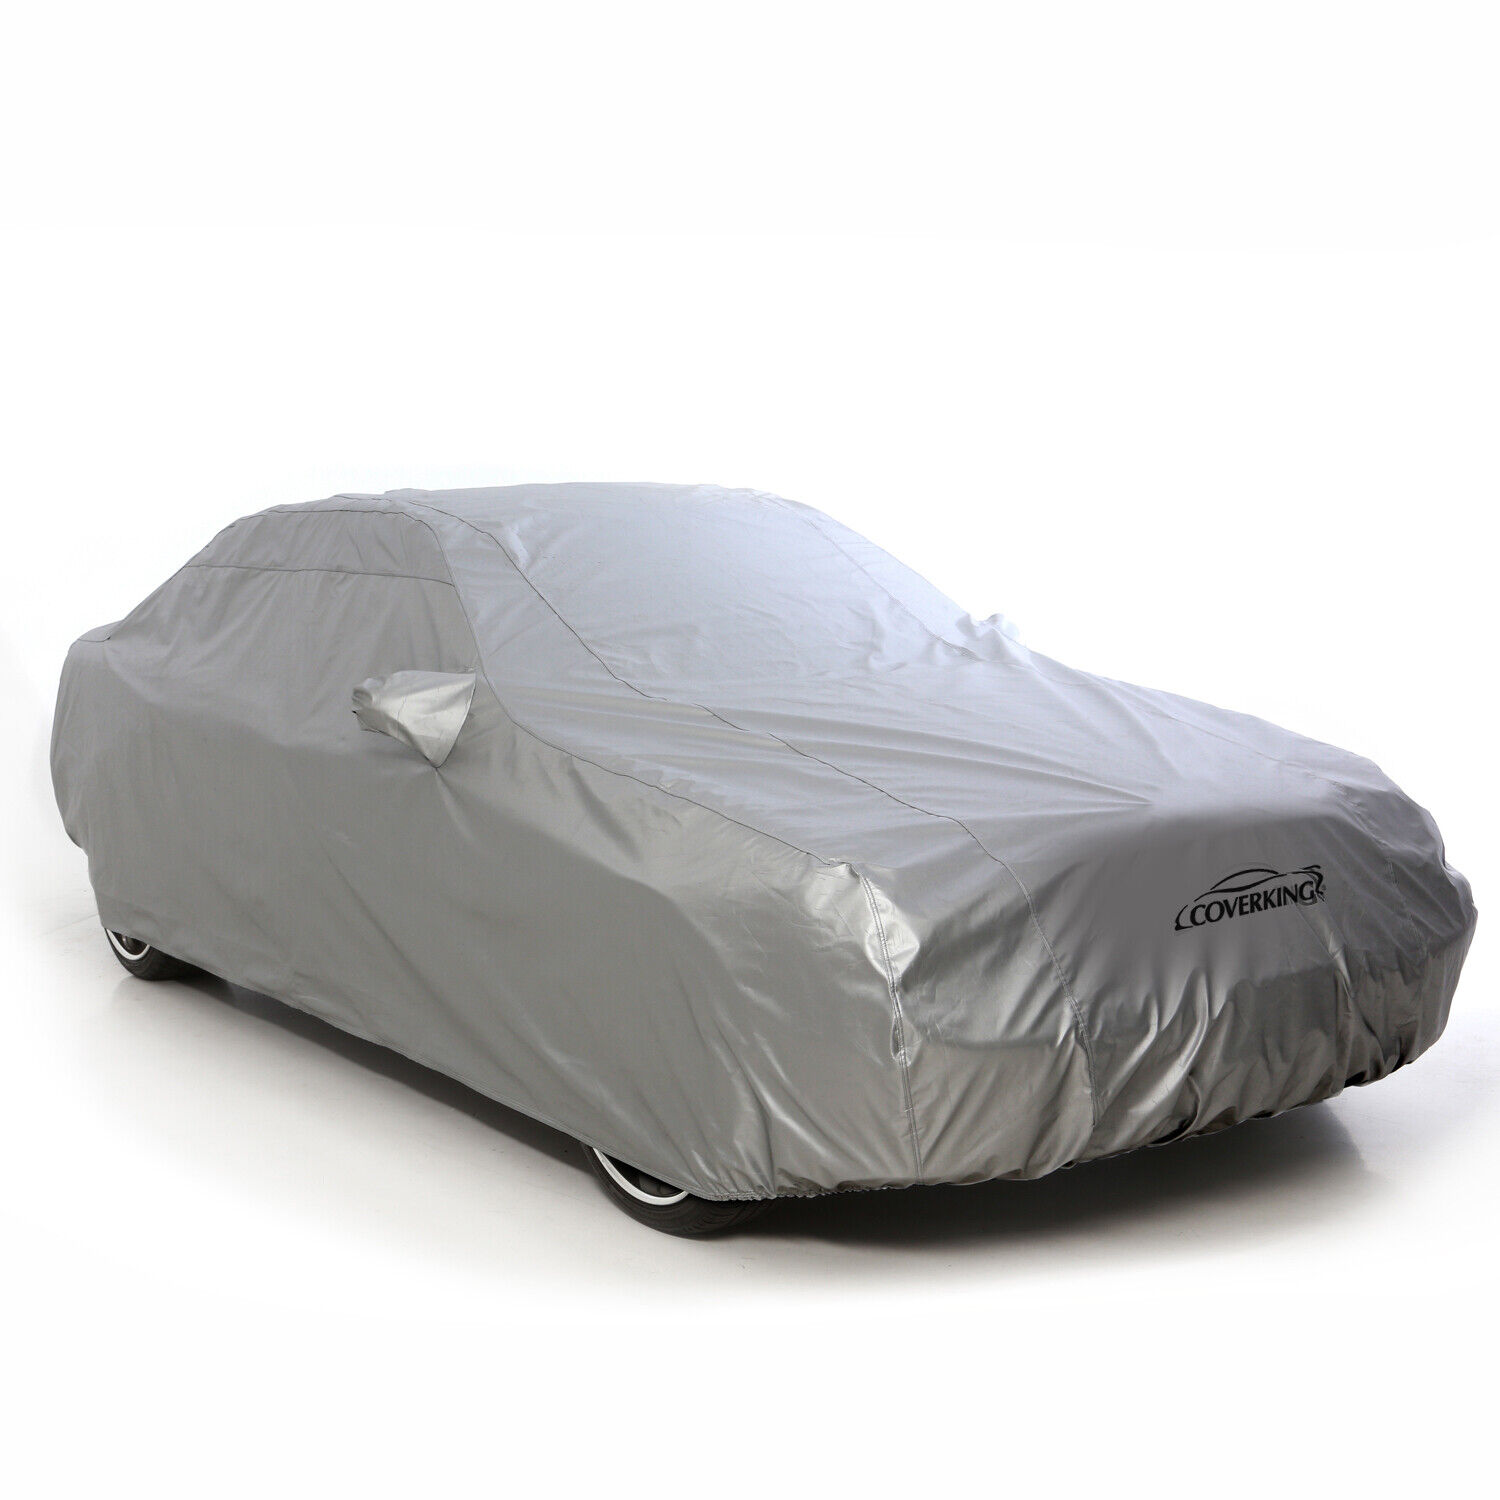 Coverking Silverguard Plus Custom Car Cover for Scion FR-S - Made to Order